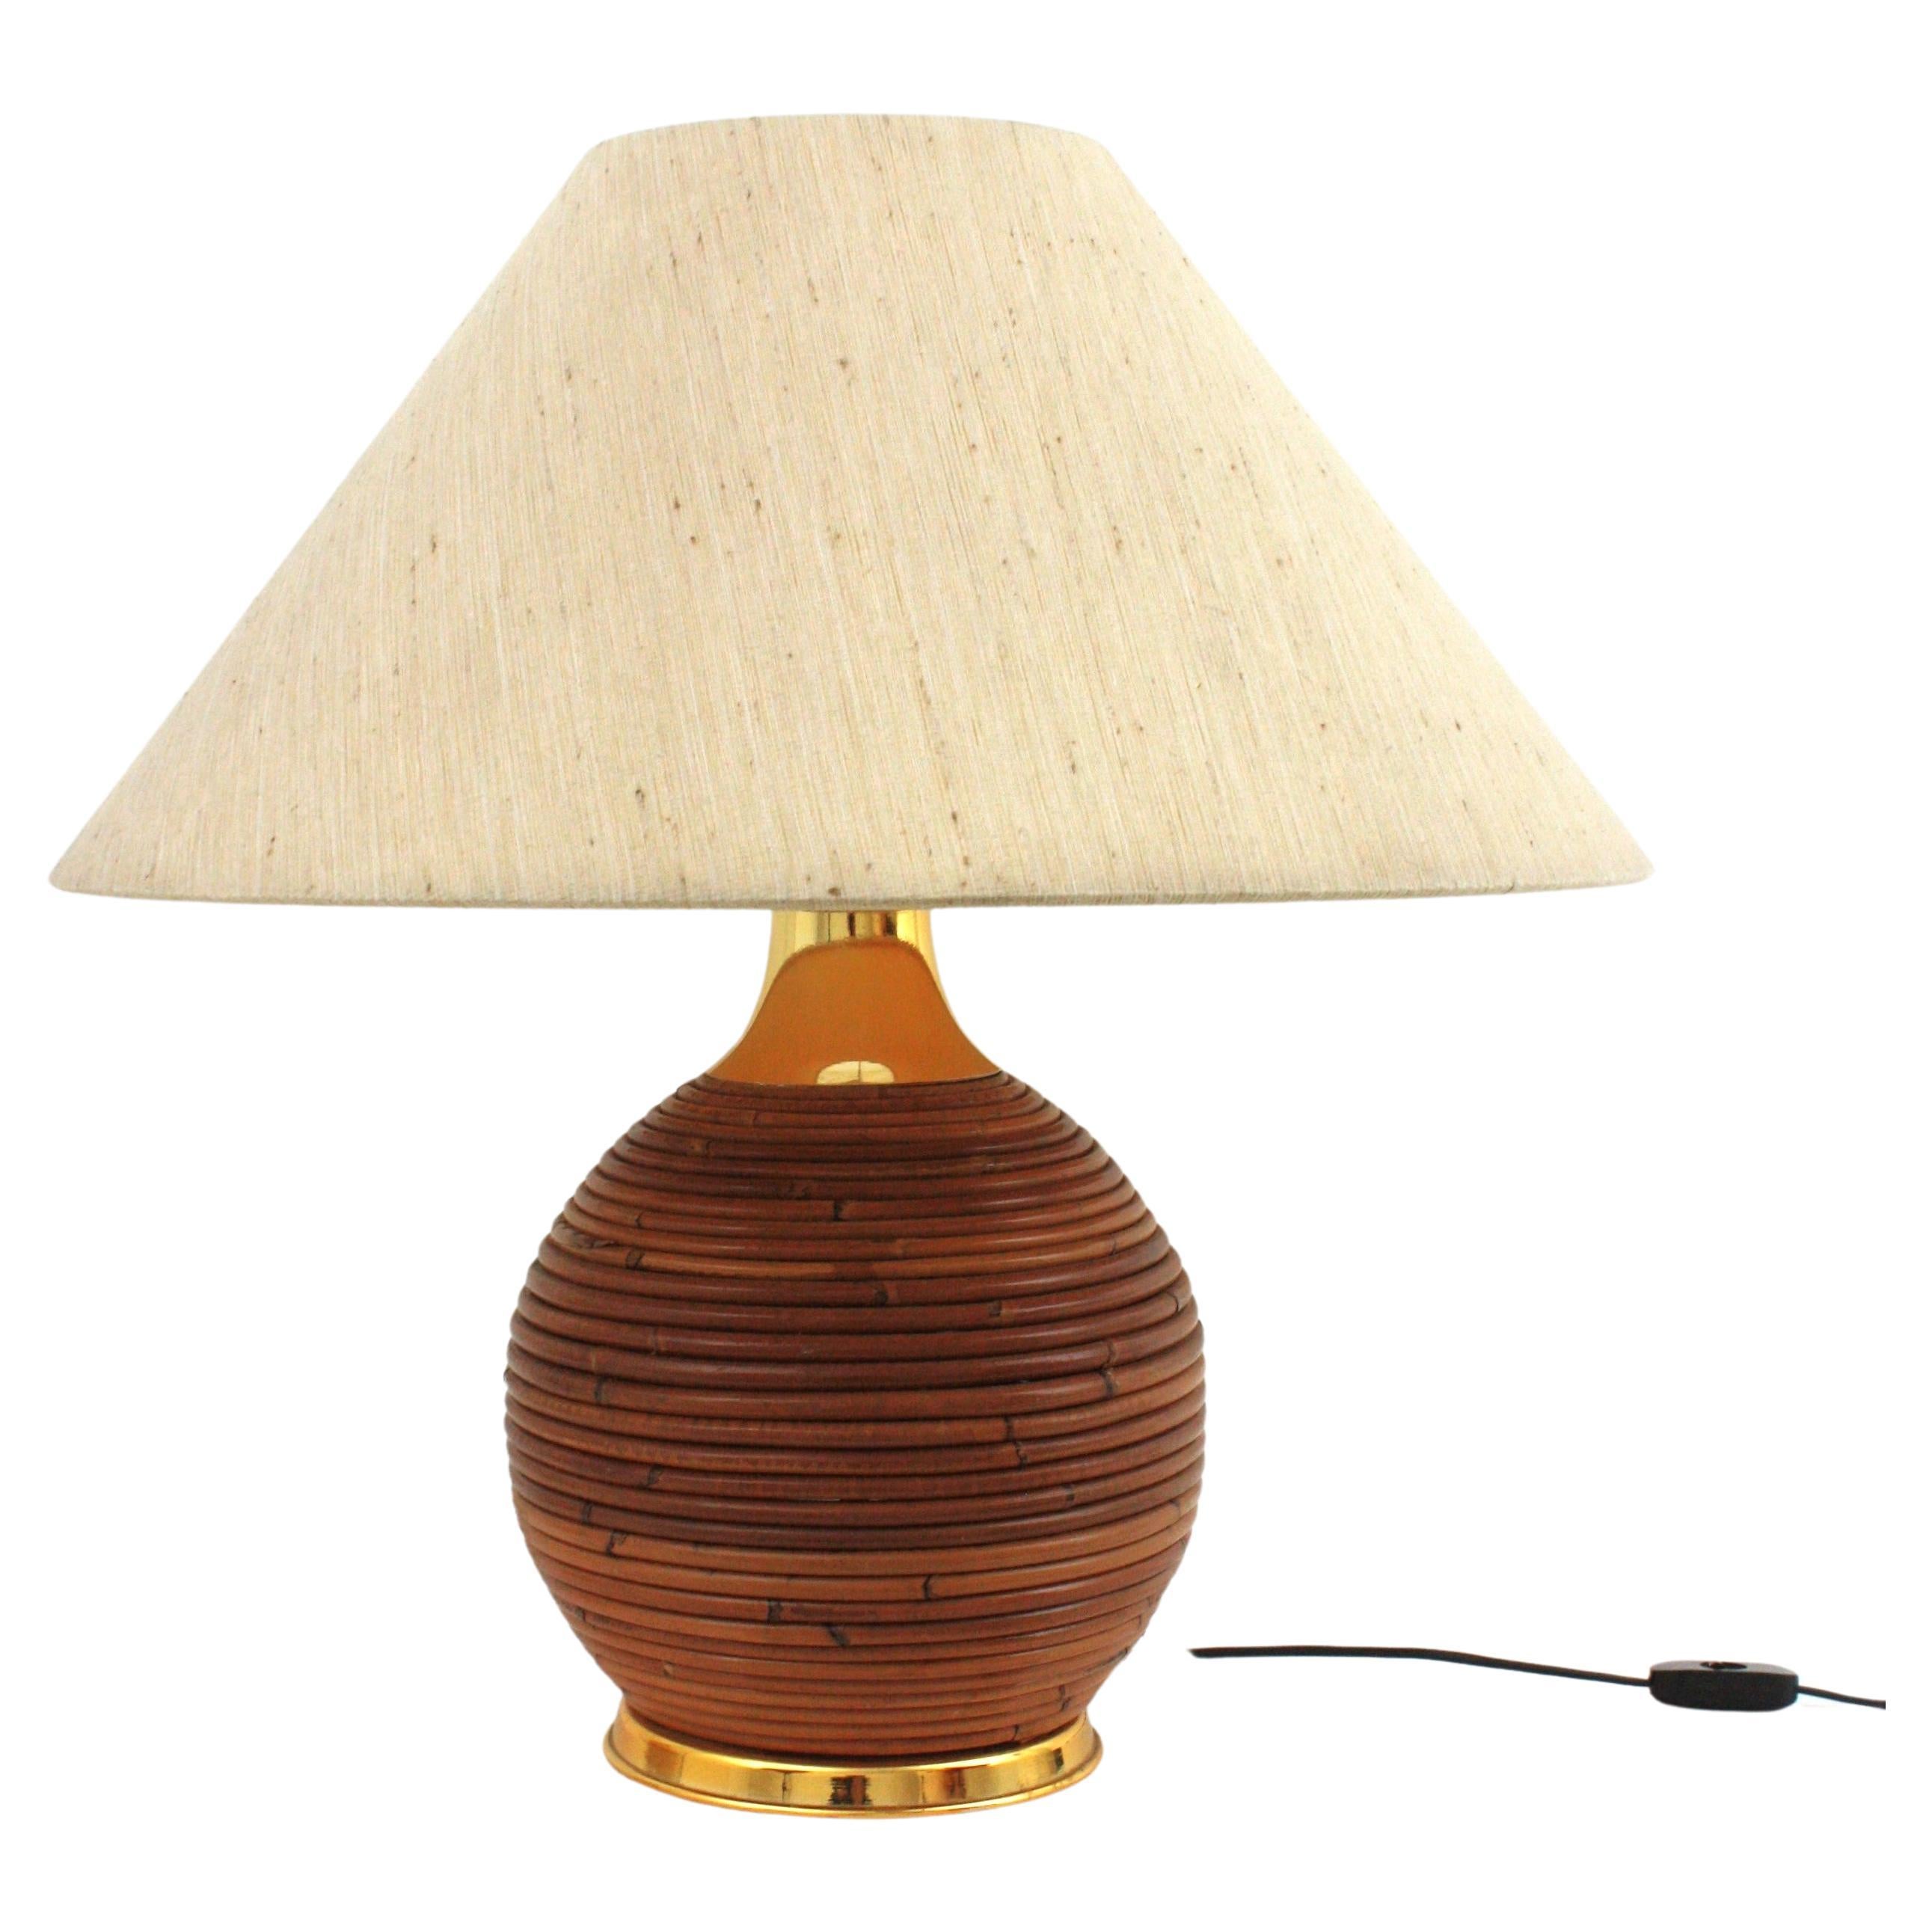 Large Italian Rattan and Brass Ball Table Lamp, 1970s For Sale